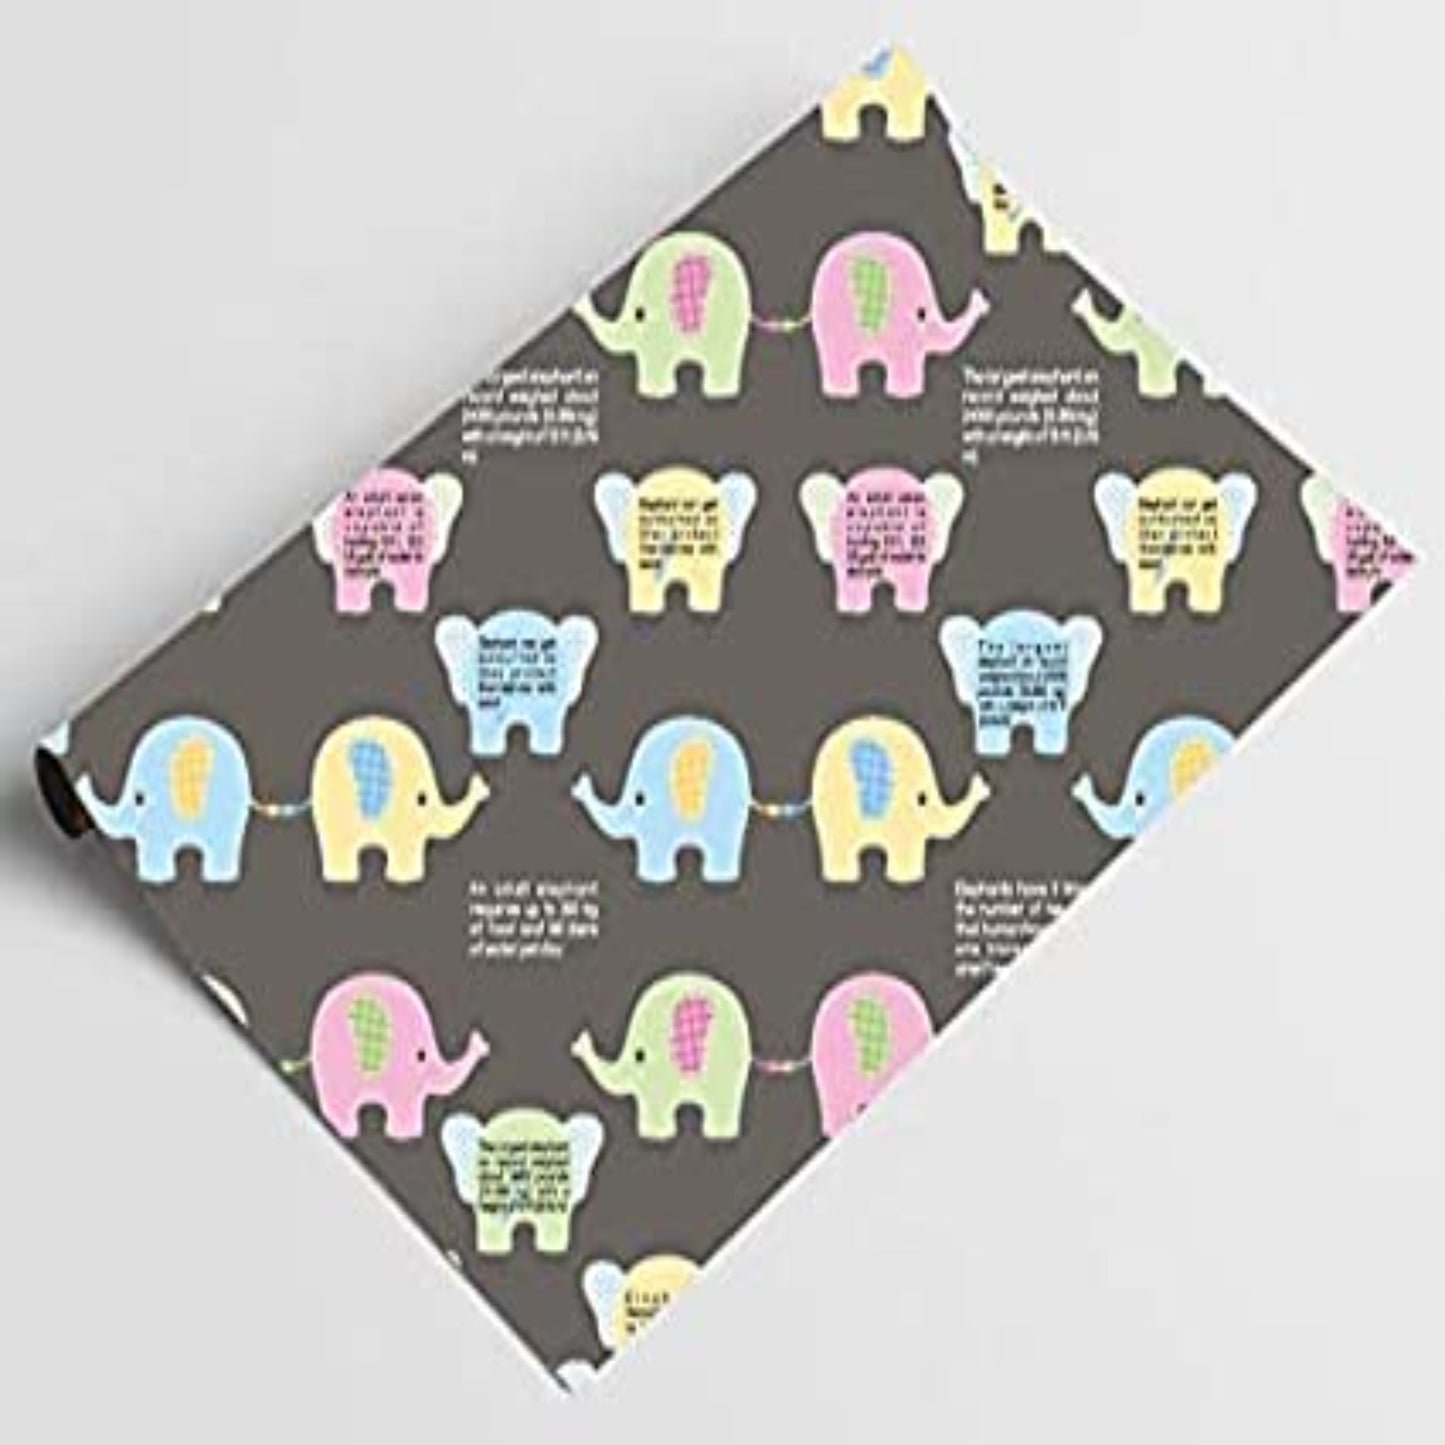 Accuprints | Design Elephant print| Size 18 X 25 inch | Wrapping paper sheets for birthday gift